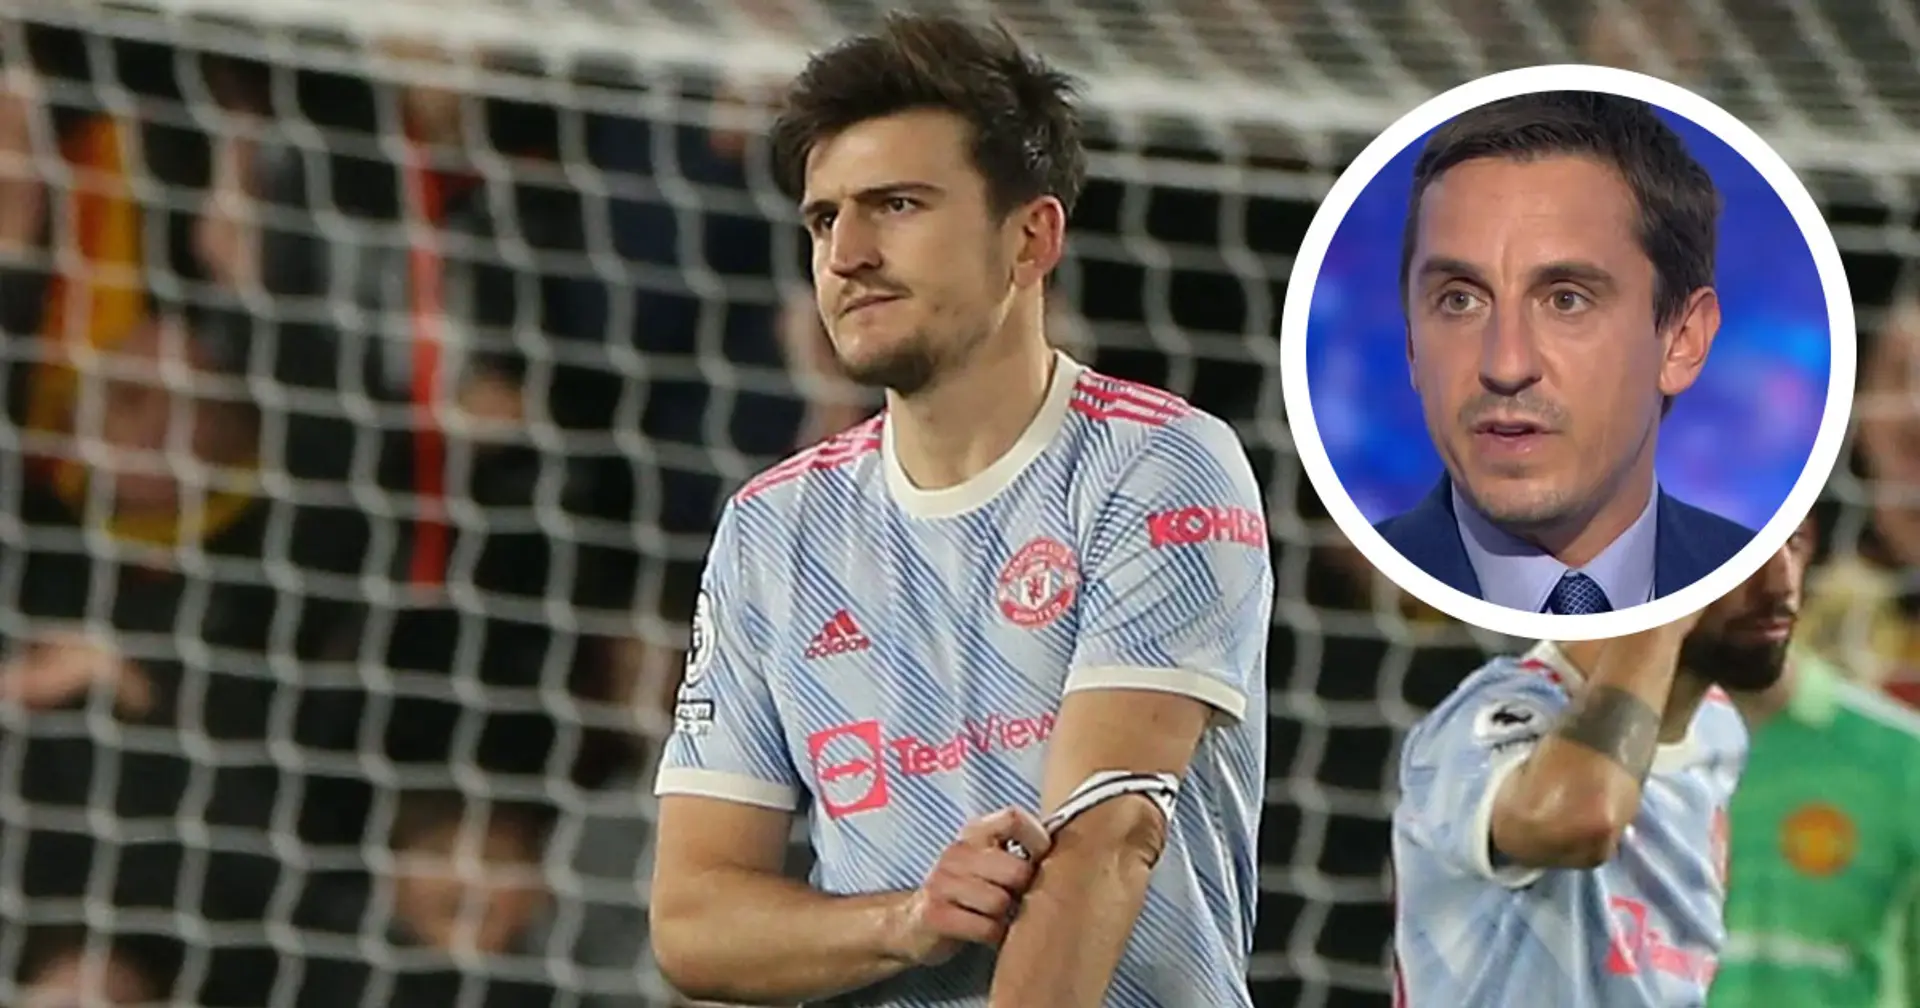 'Harry is the future of the club': Neville's comments on Maguire revealed after Watford nightmare